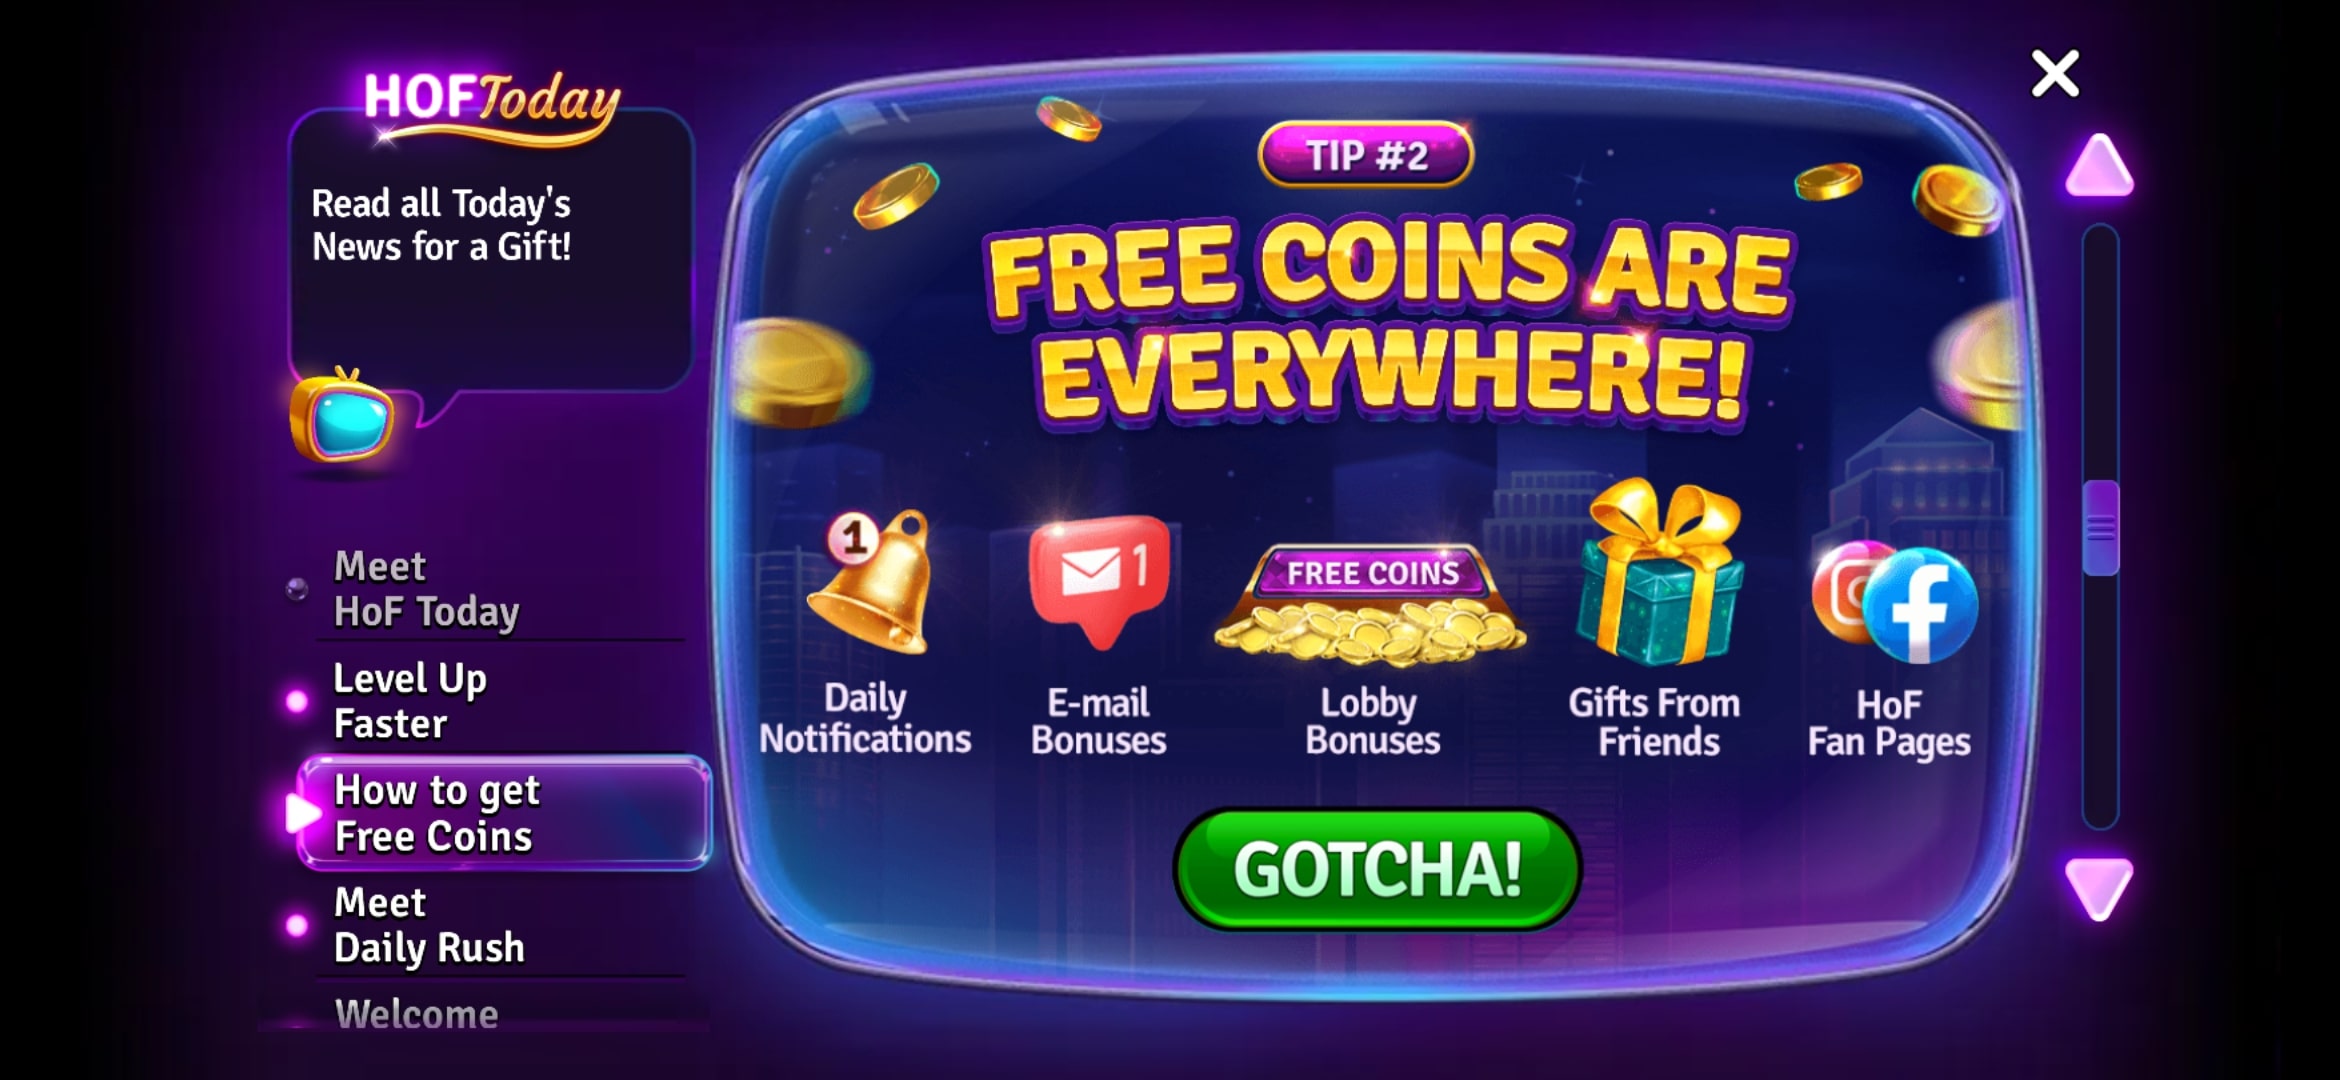 How to get Free Coins on House of Fun